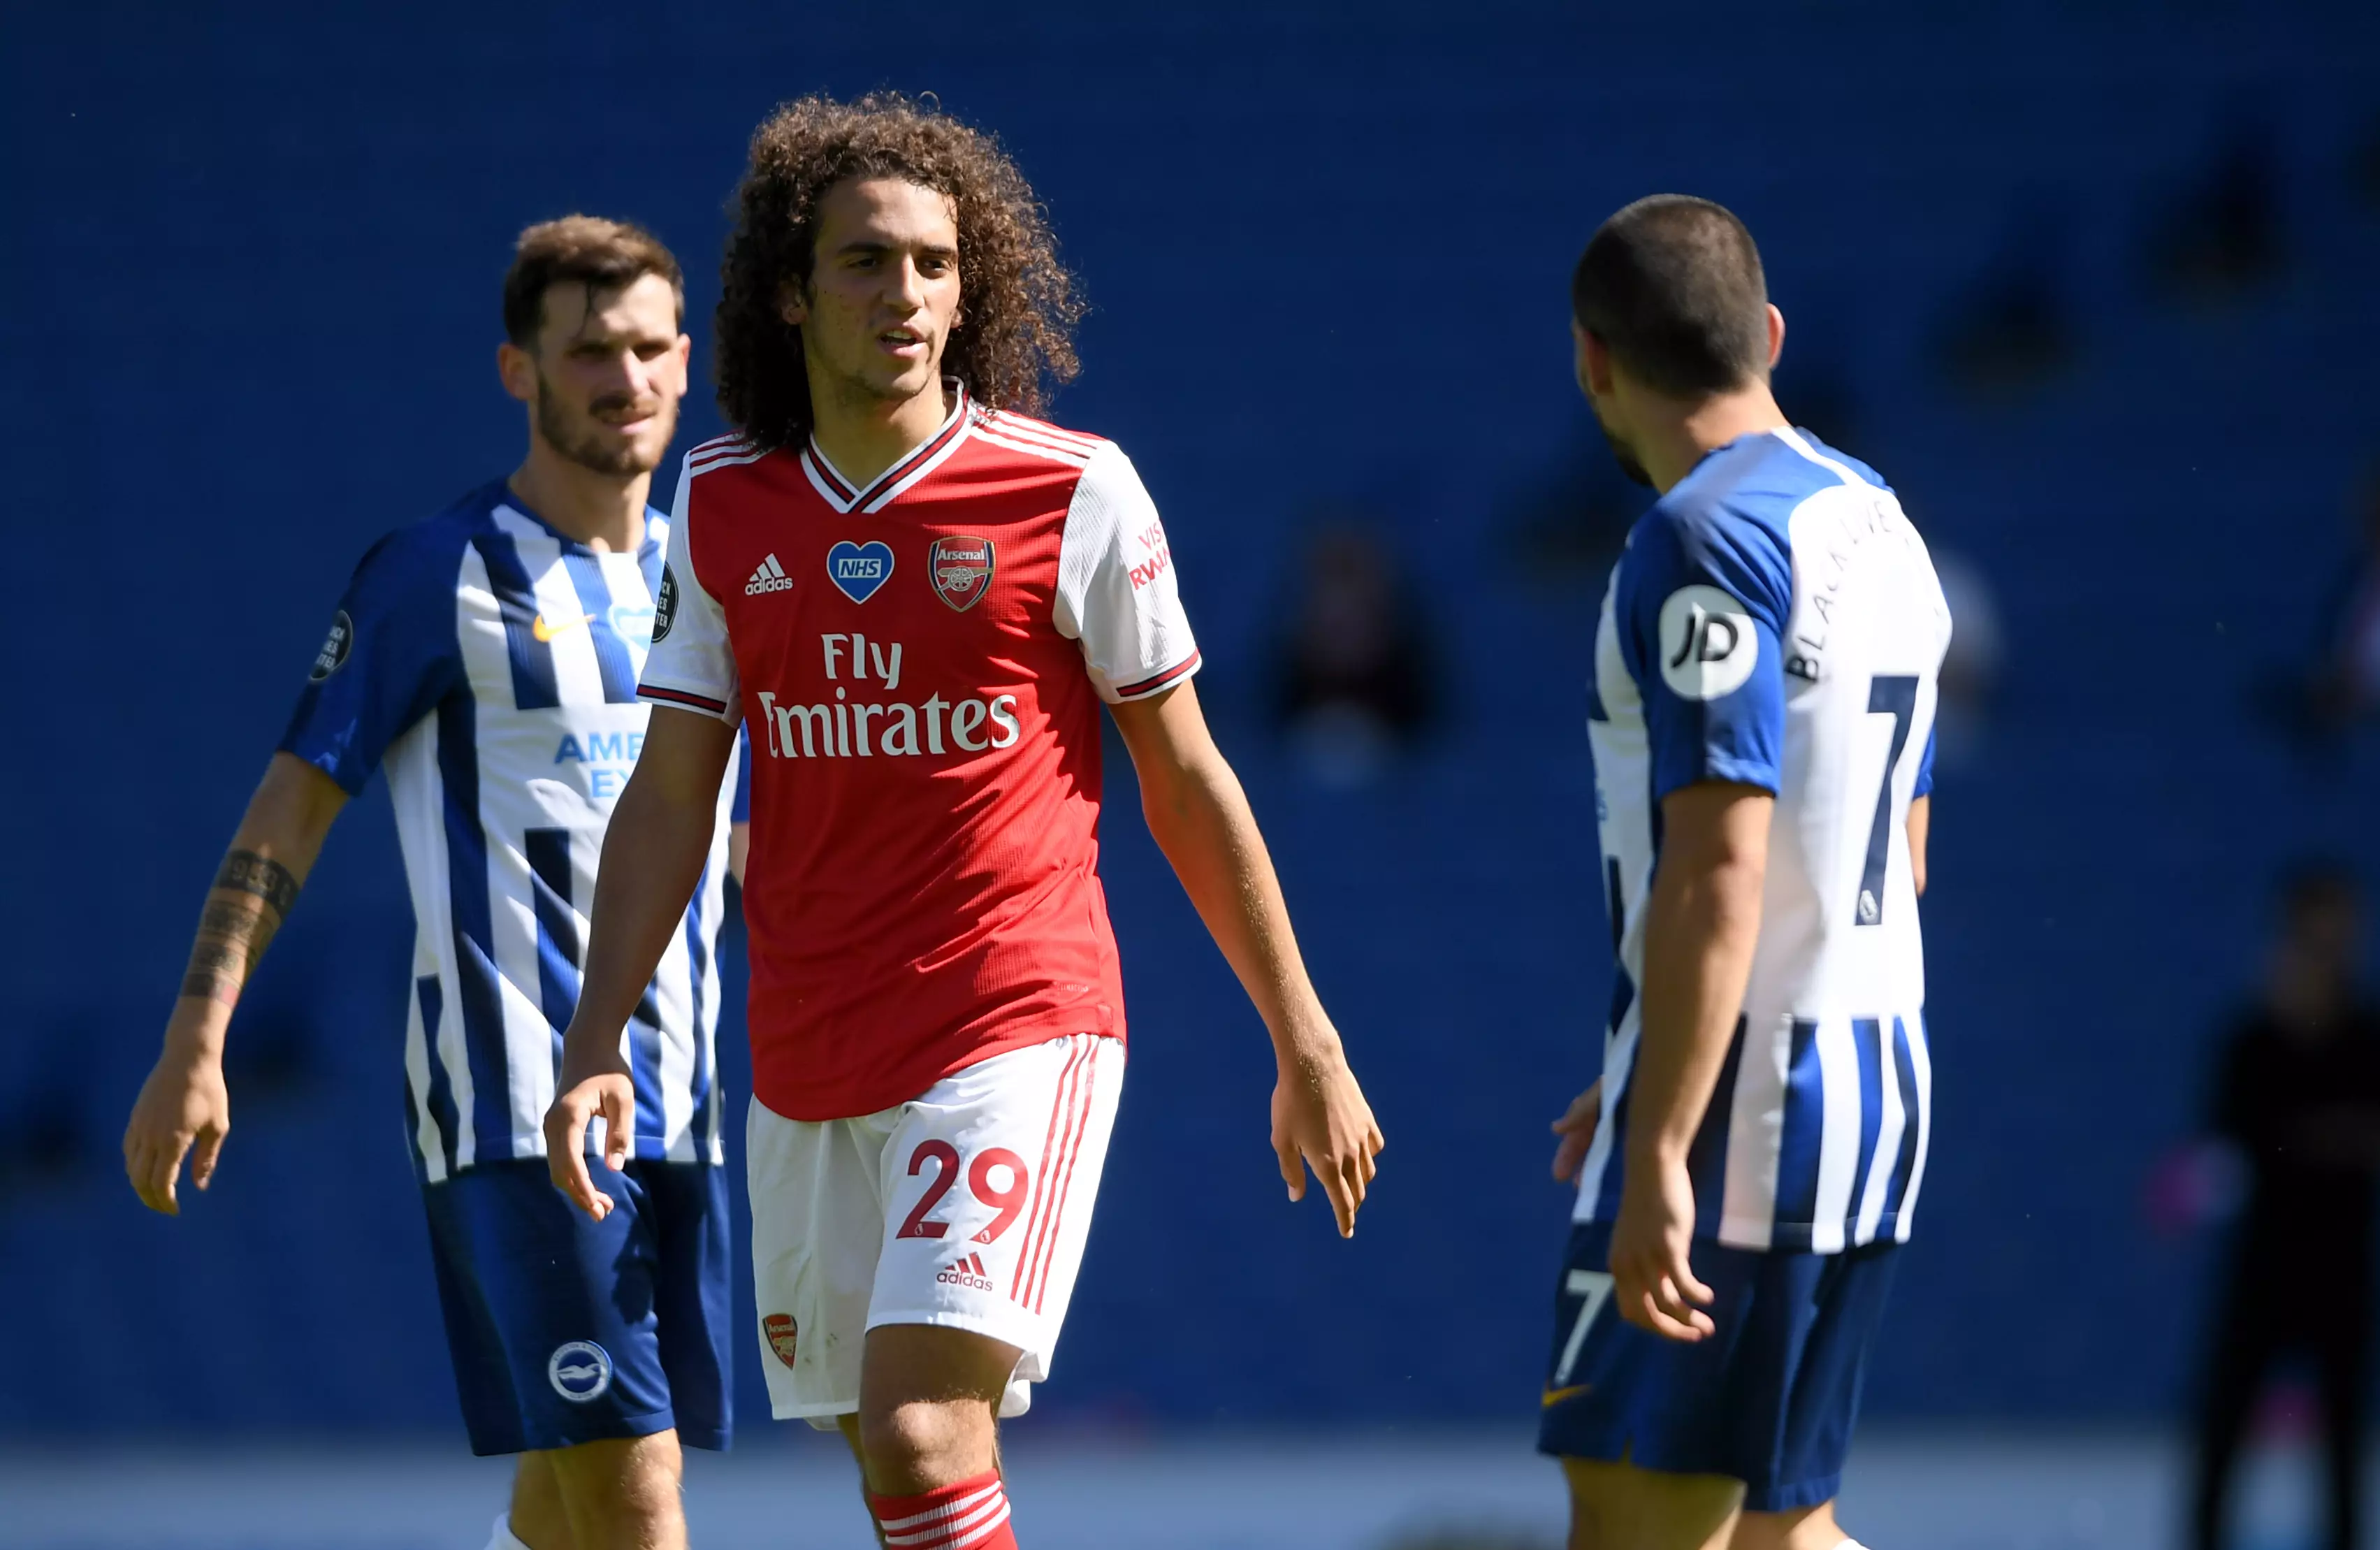 Guendouzi is likely to be punished after clashing with Maupay. Image: PA Images